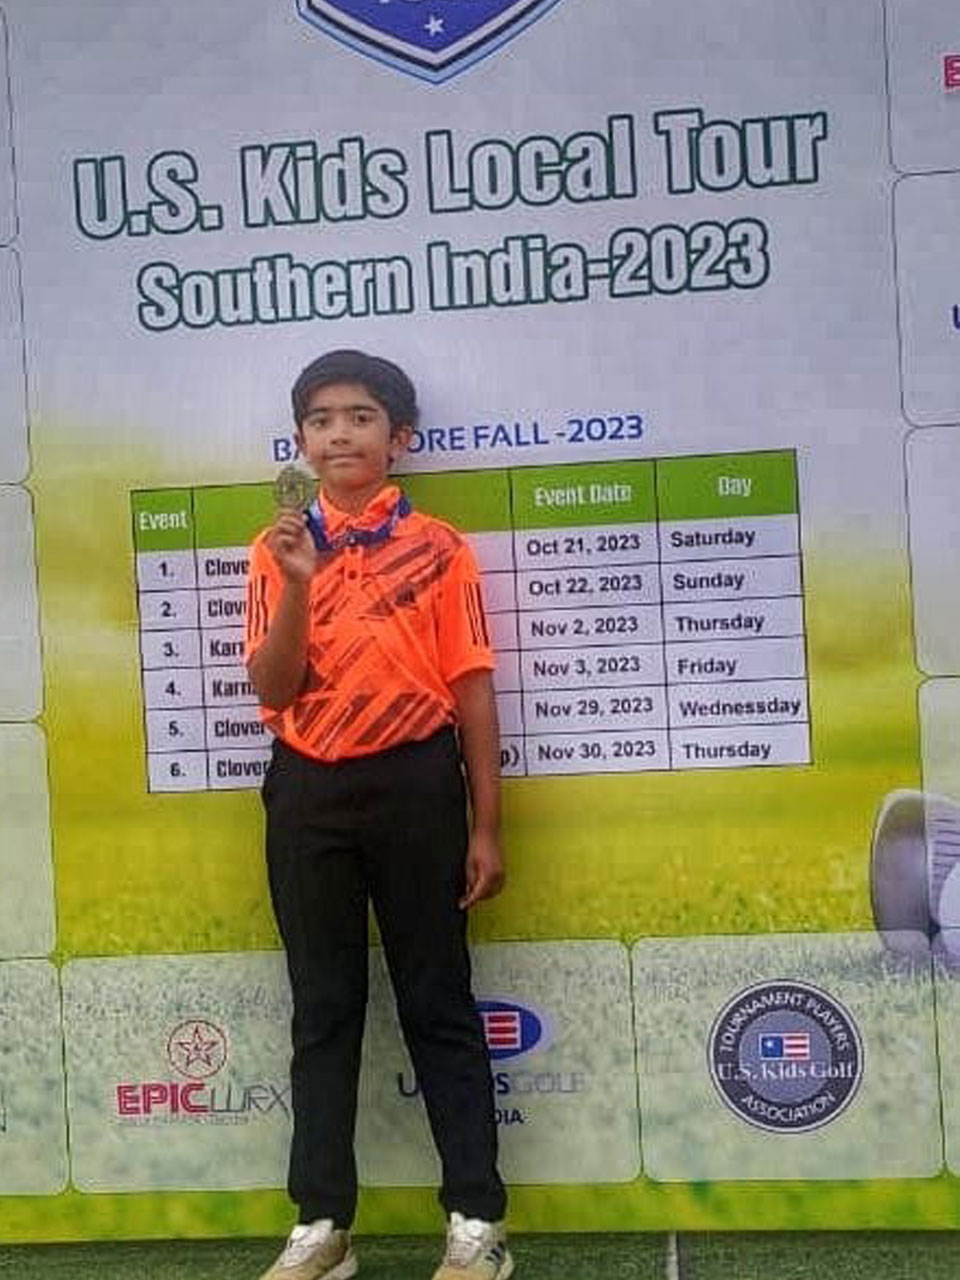 Ryan Advik wins in his category at both U.S. Kids Southern India events at Clover Greens